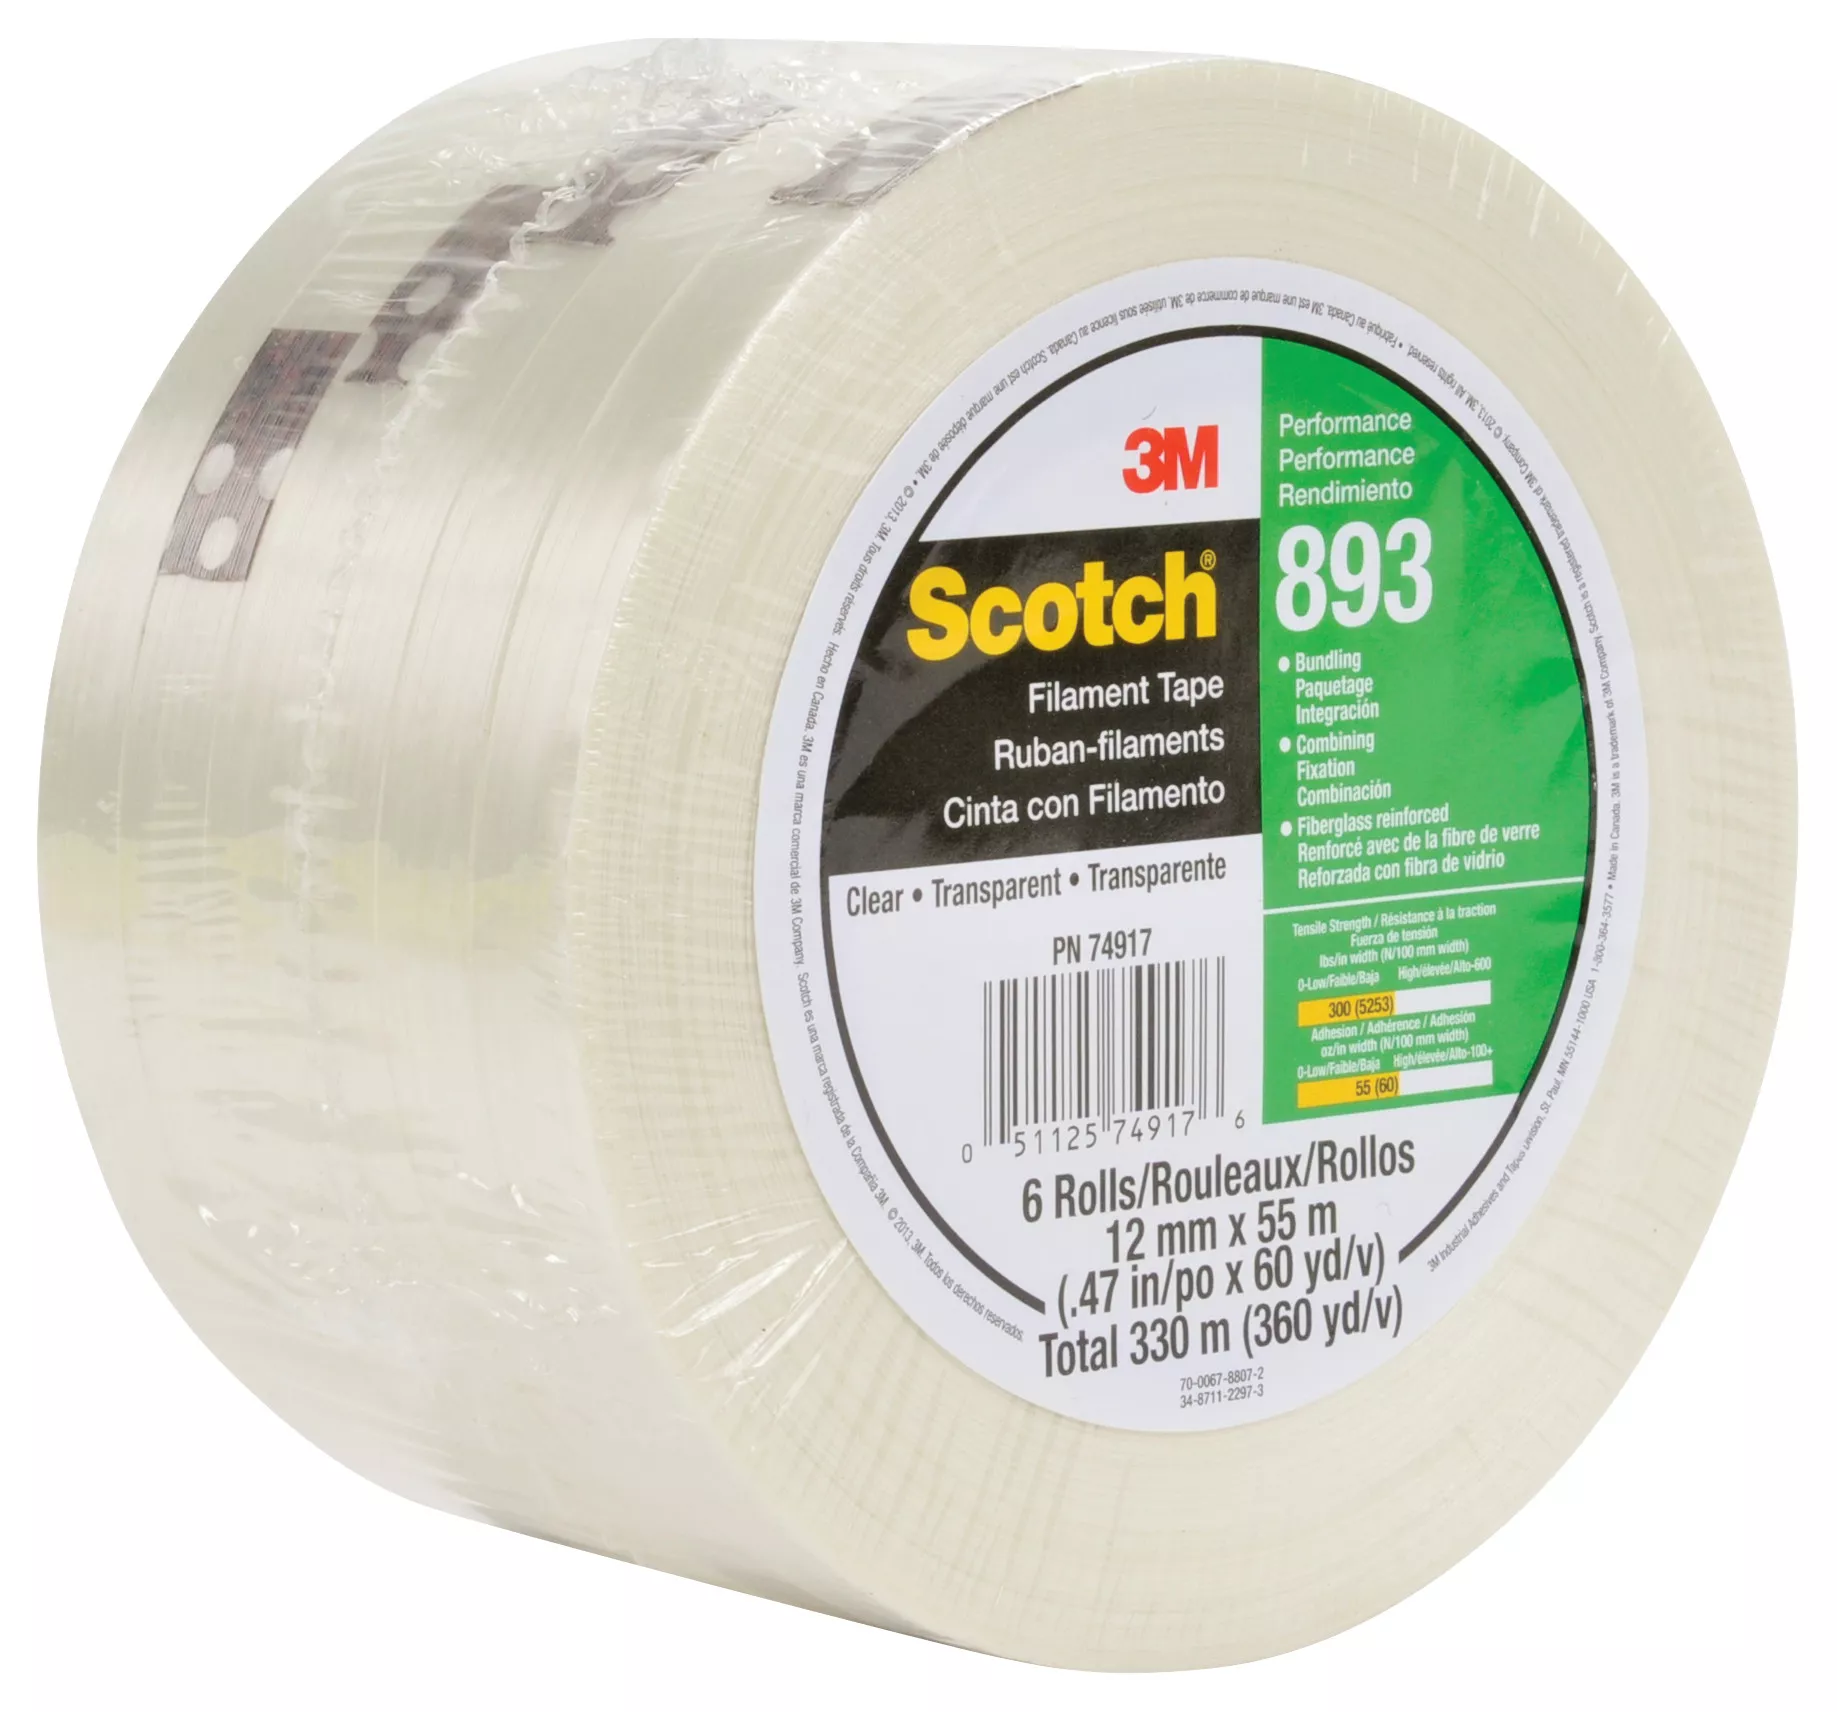 Product Number 893 | Scotch® Filament Tape 893